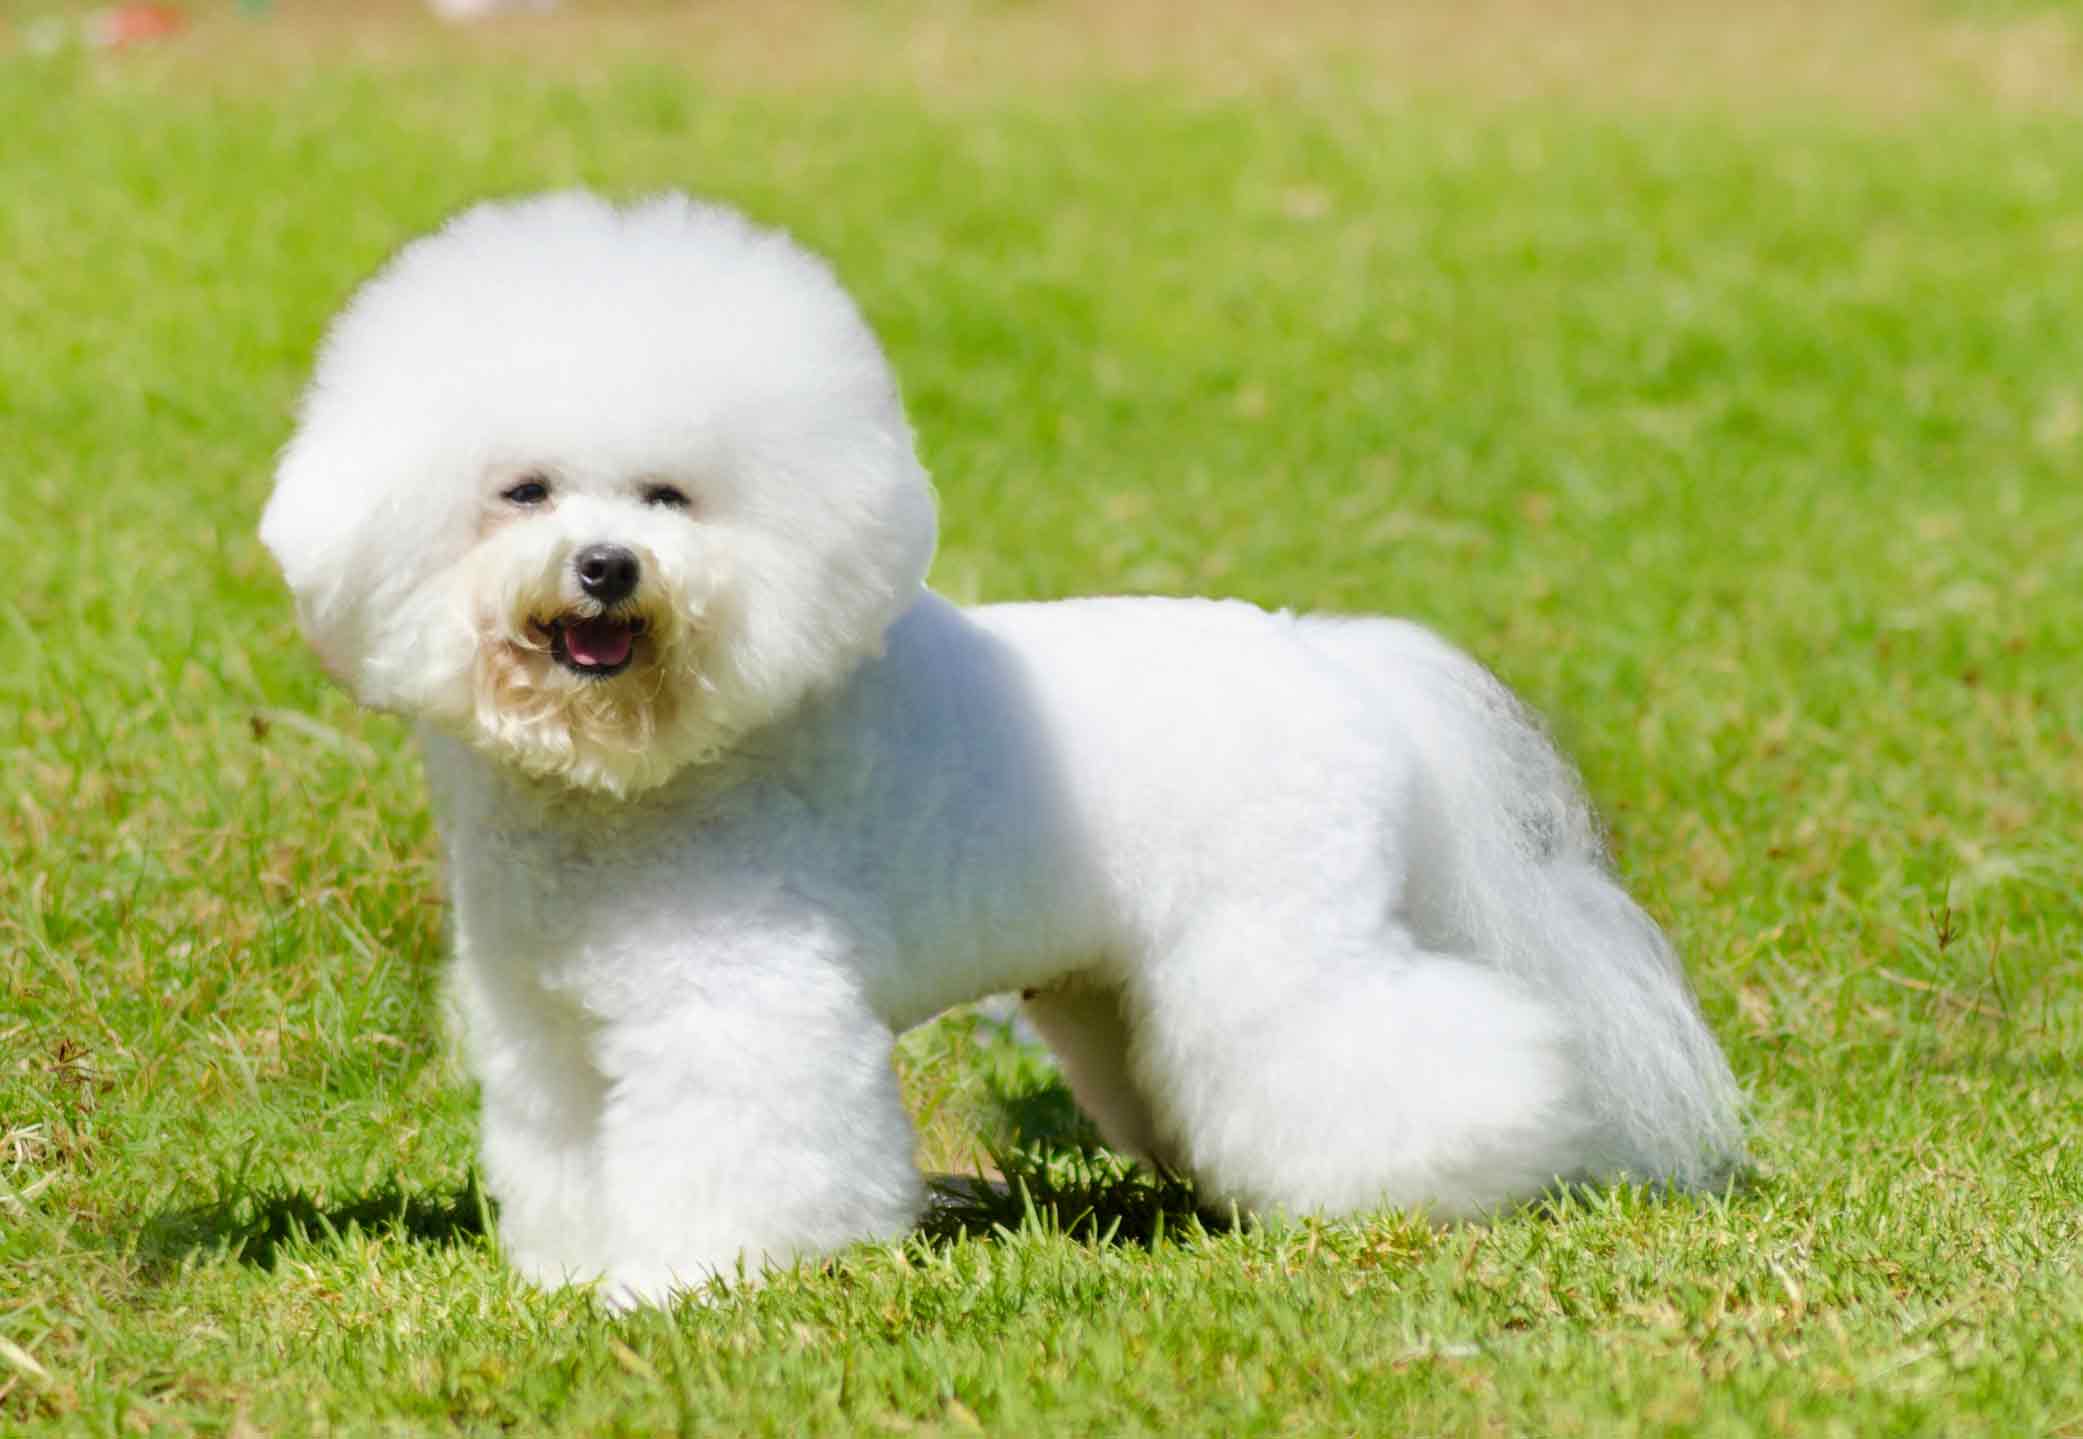 Photo of a Bichon Frise dog standing in grass